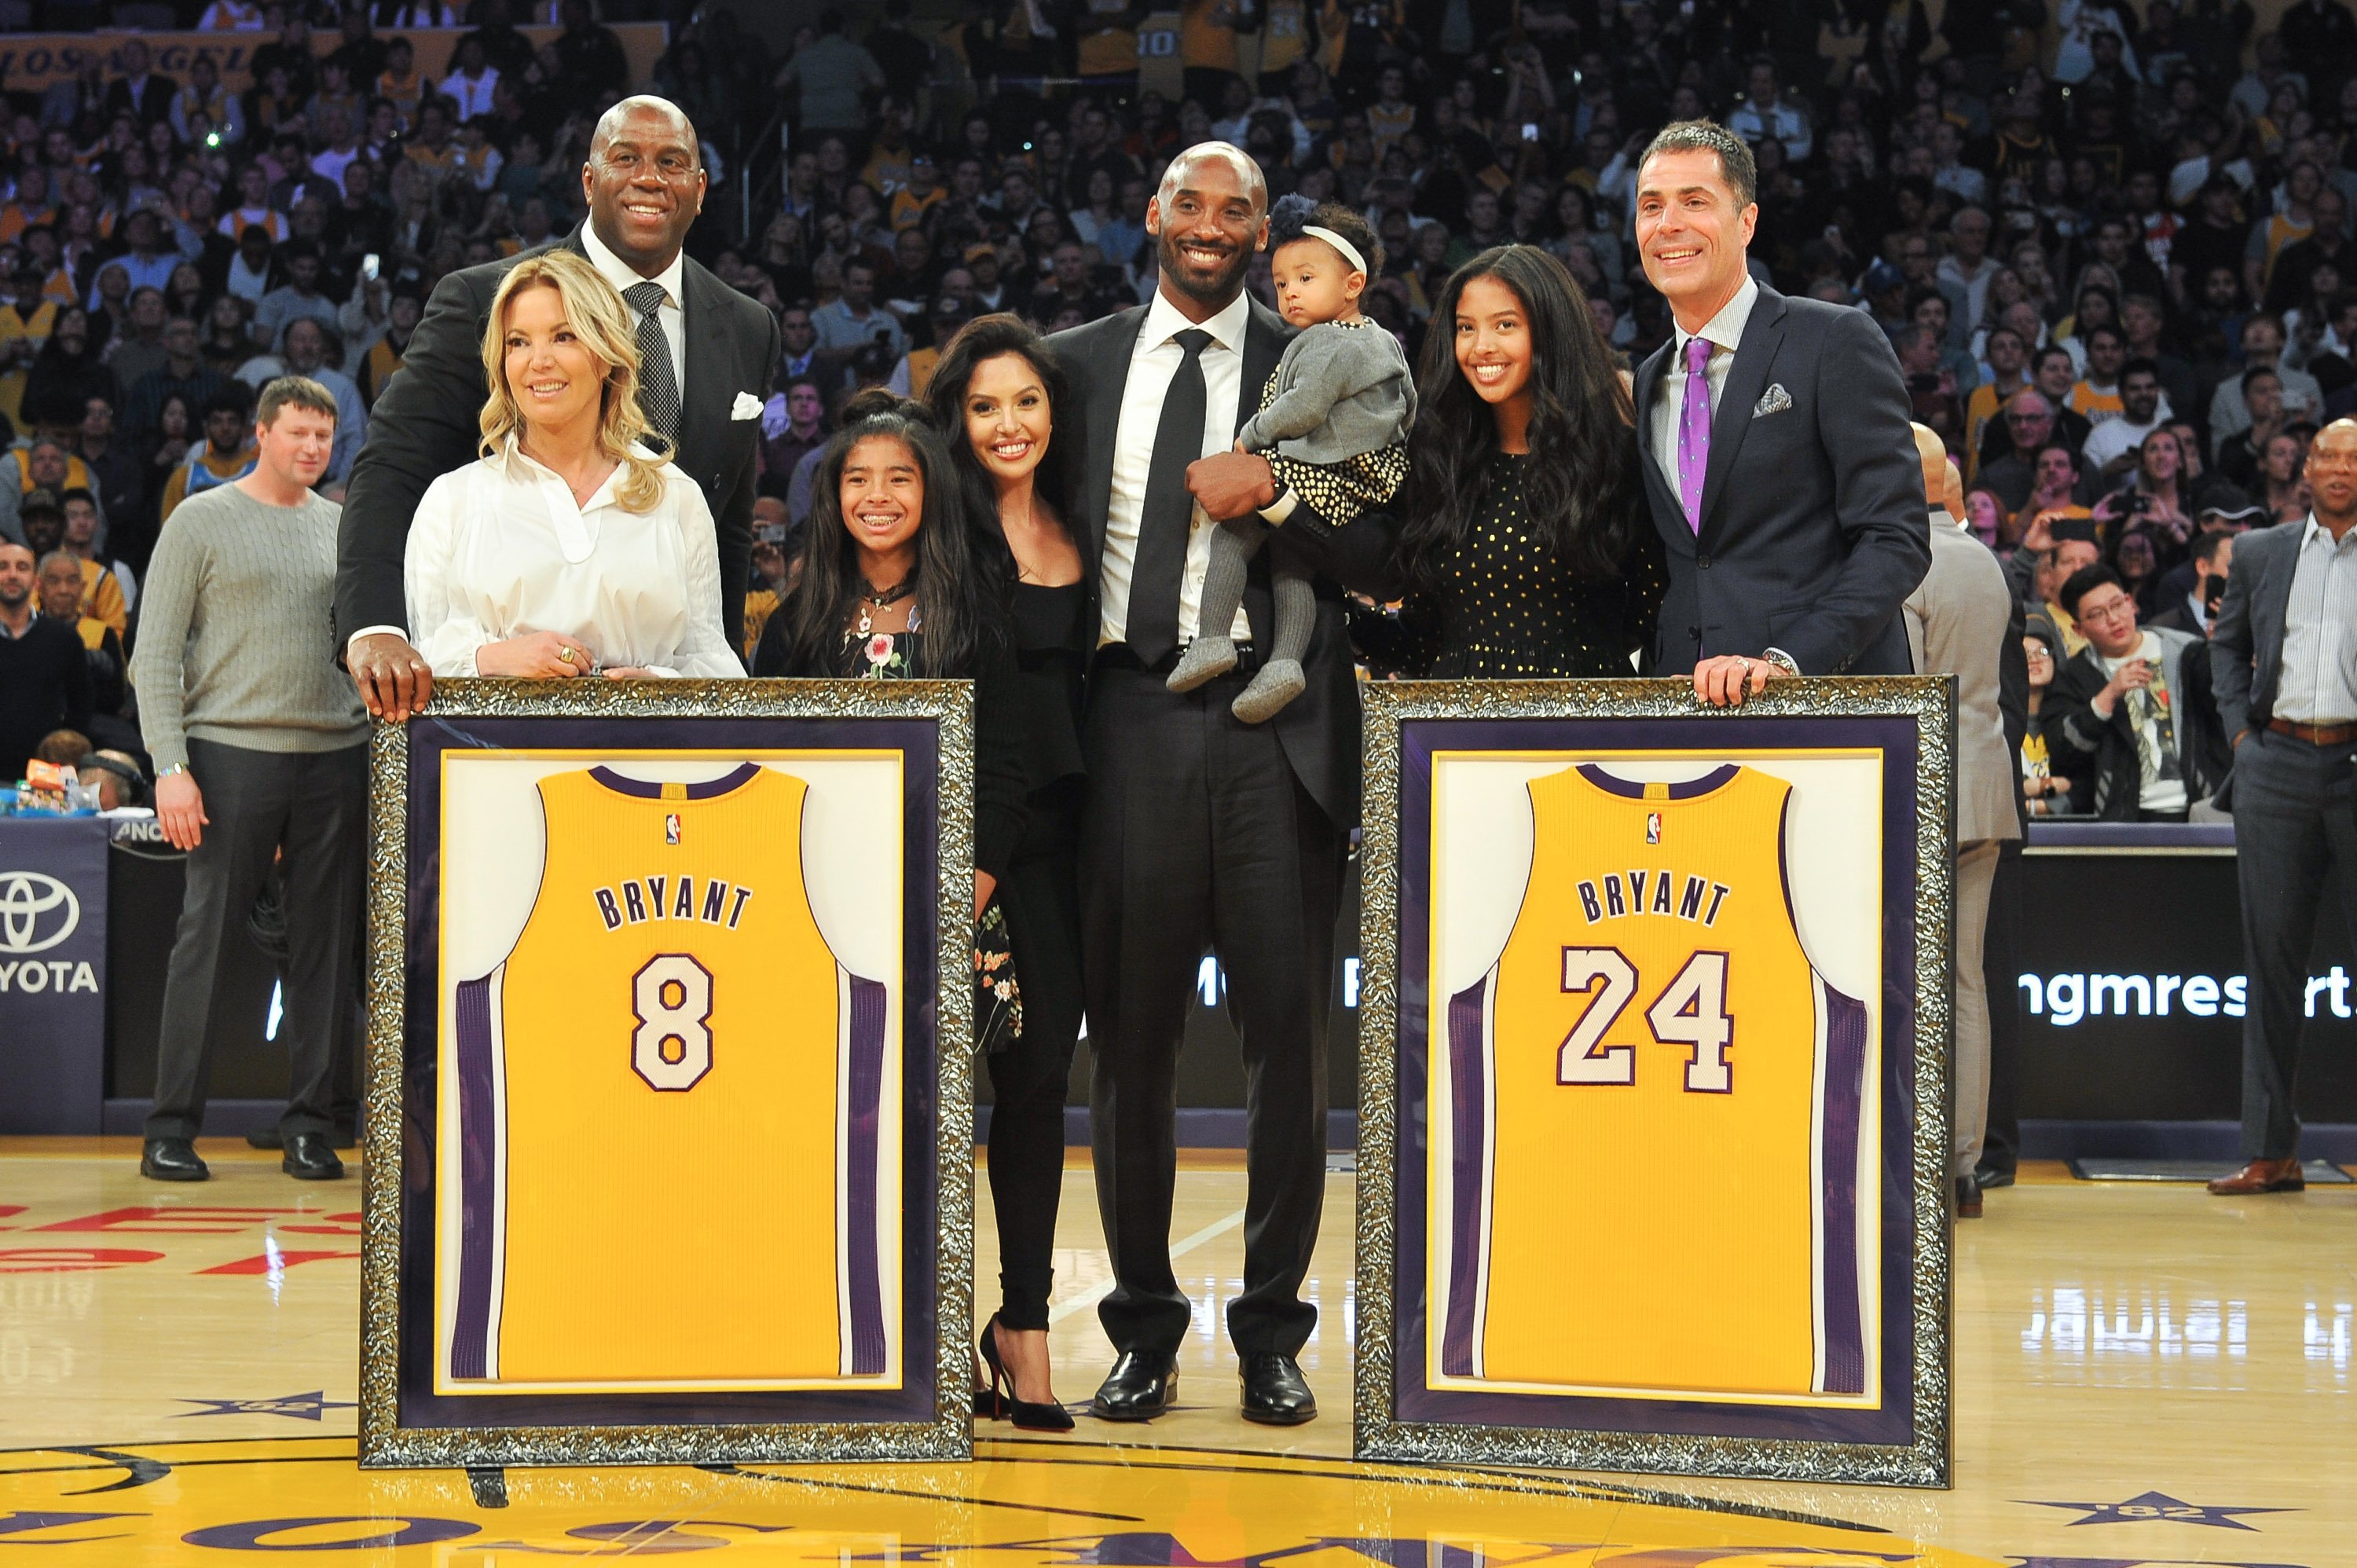 Magic Johnson, Jeanie Buss, Kobe Bryant, Vanessa Bryant, their daughters, and Rob Pelinka during Kobe Bryant's jersey retirement ceremony  at Staples Center on December 18, 2017  | Photo: GettyImages